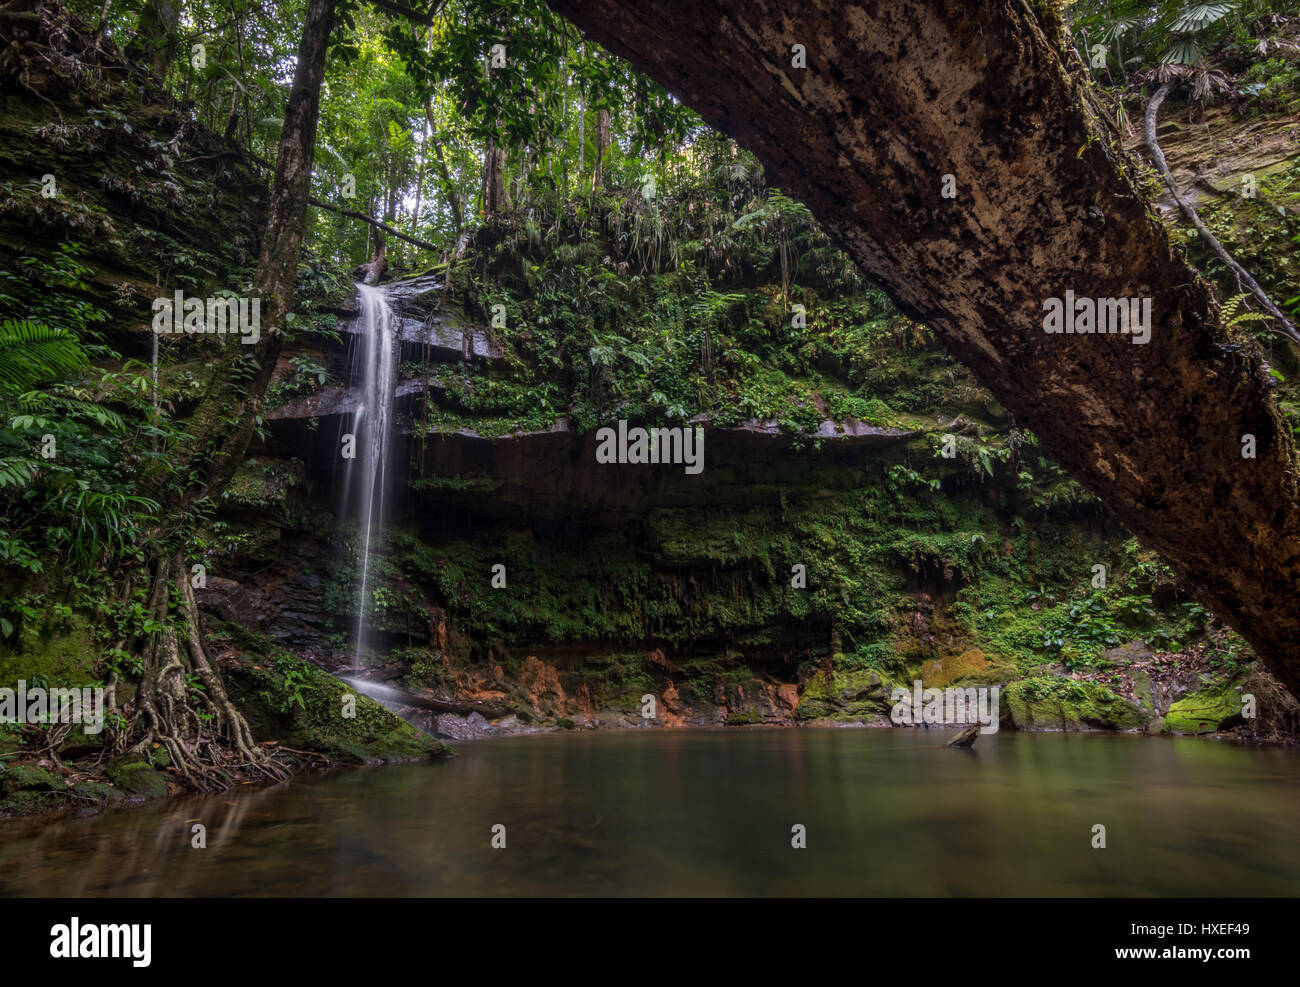 Long exposure of a remote small waterfall and its pool with rock face surround in Lambir Hills National Park, Miri, Borneo, Malaysia. Stock Photo